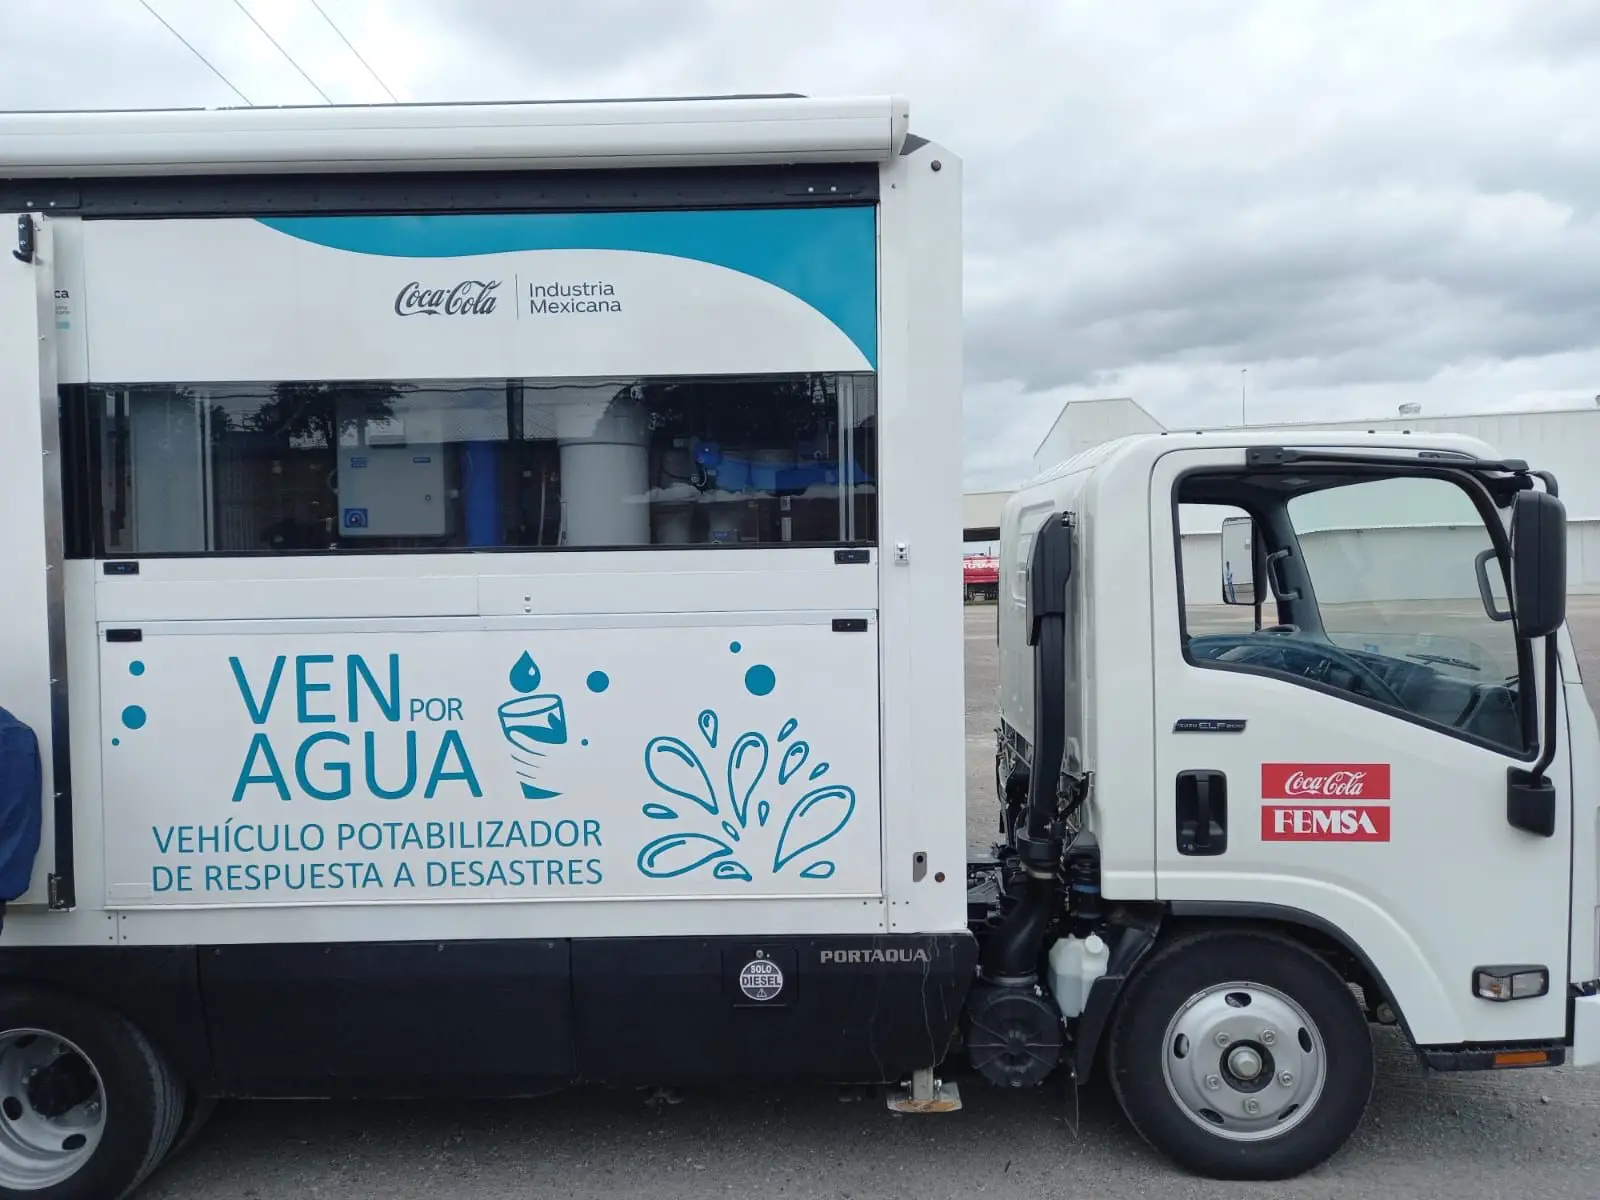 Coca-Cola FEMSA supports those affected by Hurricane Otis